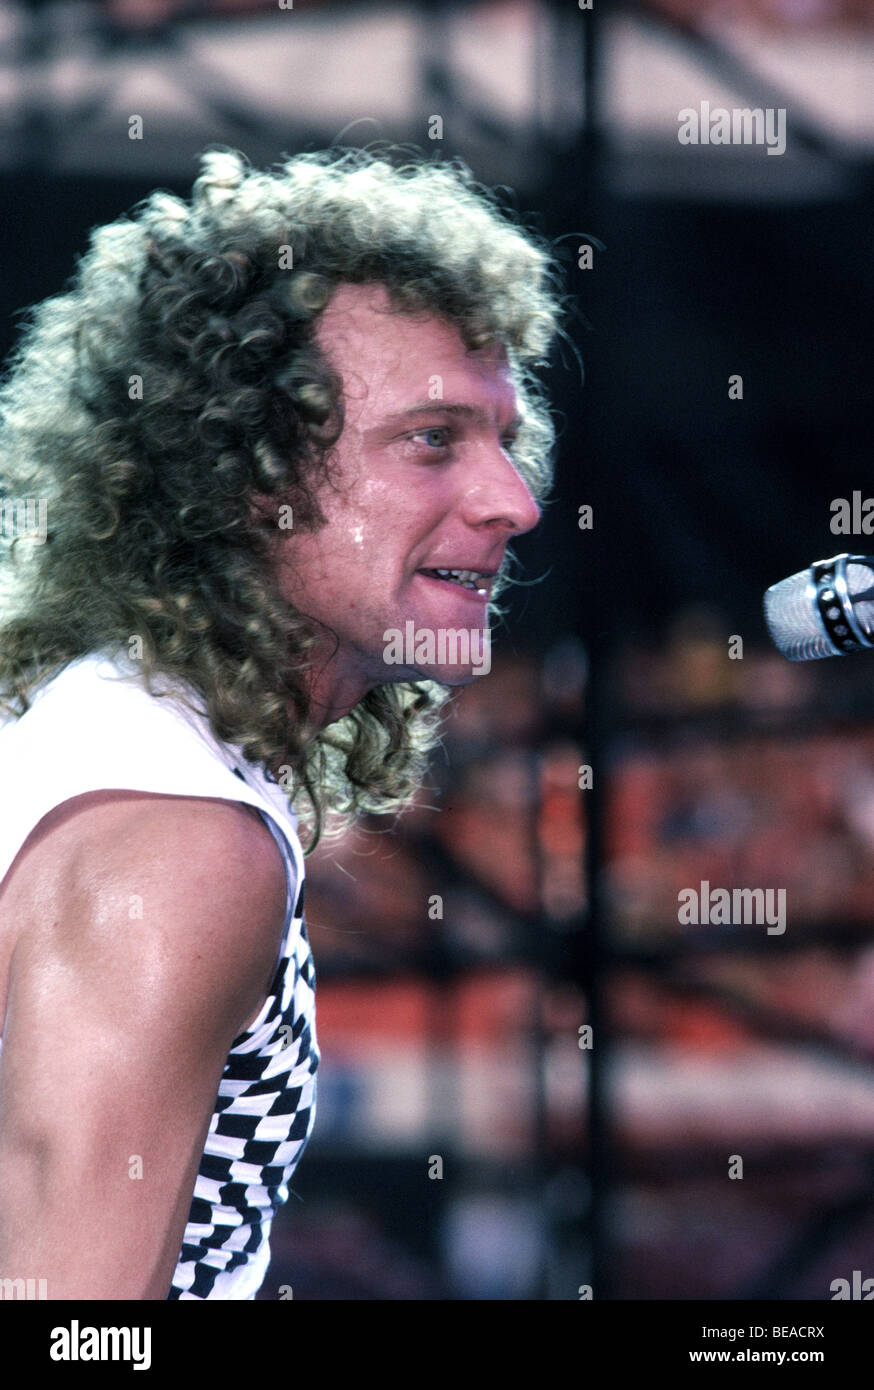 FOREIGNER - SAngl0-US rock group about 1980 with Lou Gramm on vocals Stock Photo